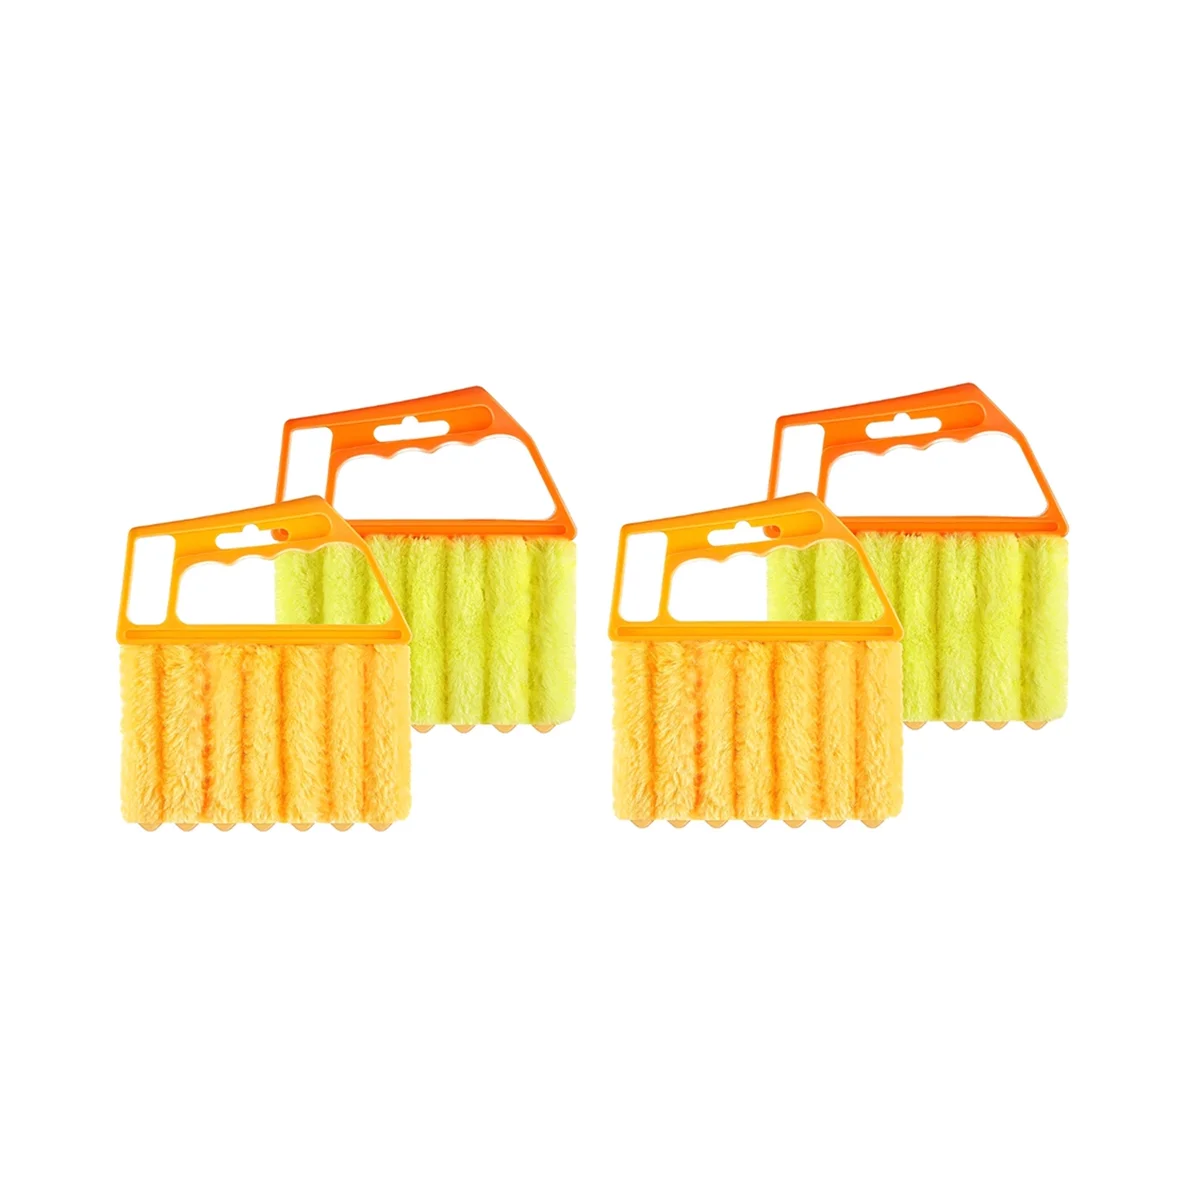 

4Pcs Handheld Blind Cleaner Shutter Curtain Brush Dust Remover for Air Conditioning/Car Vent/Fan/Shutters-Orange&Yellow